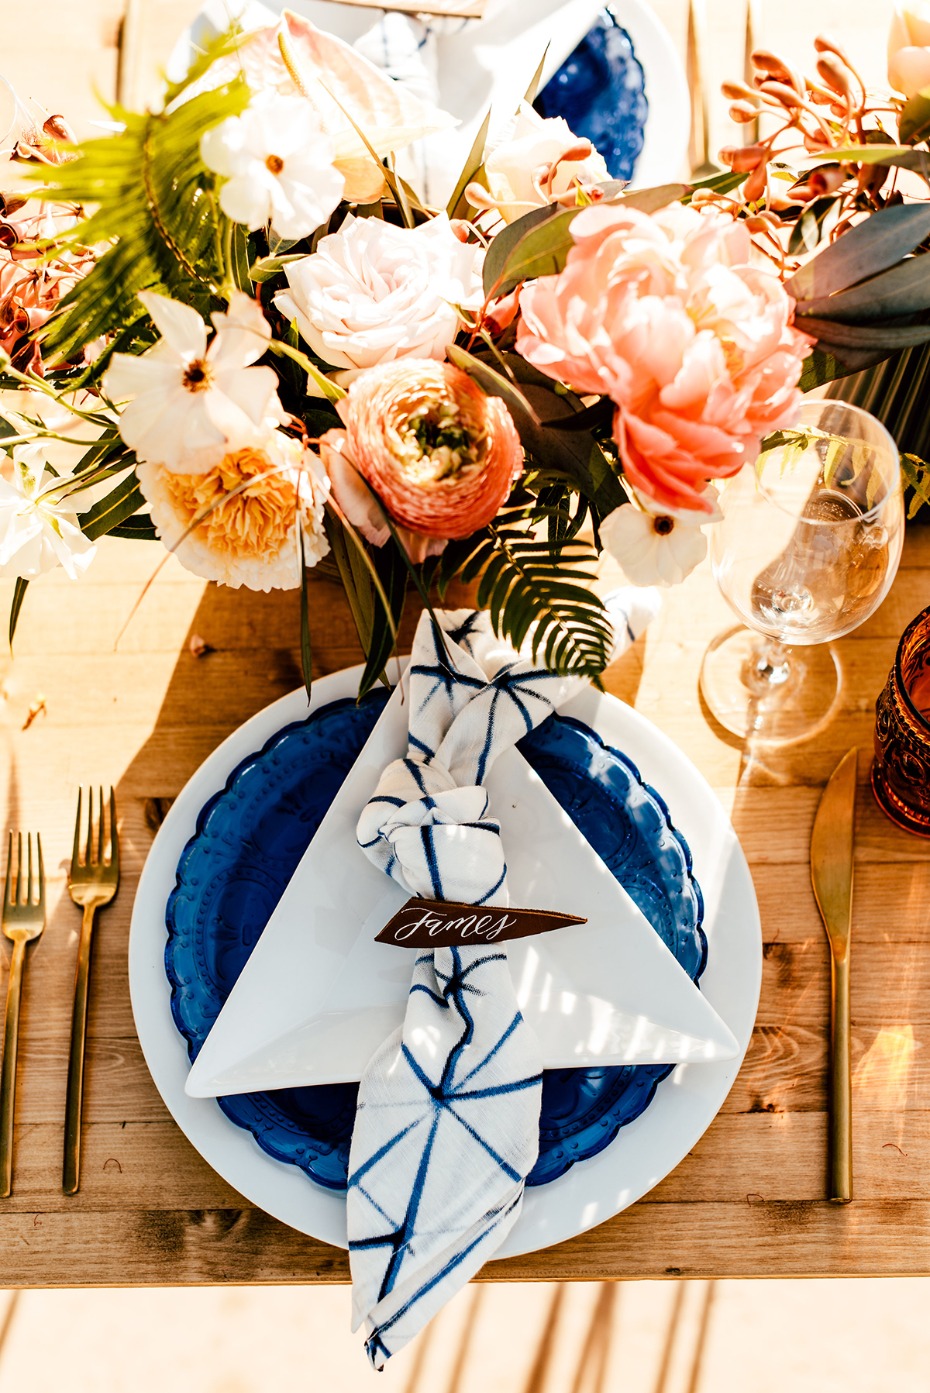 modern white and blue place setting